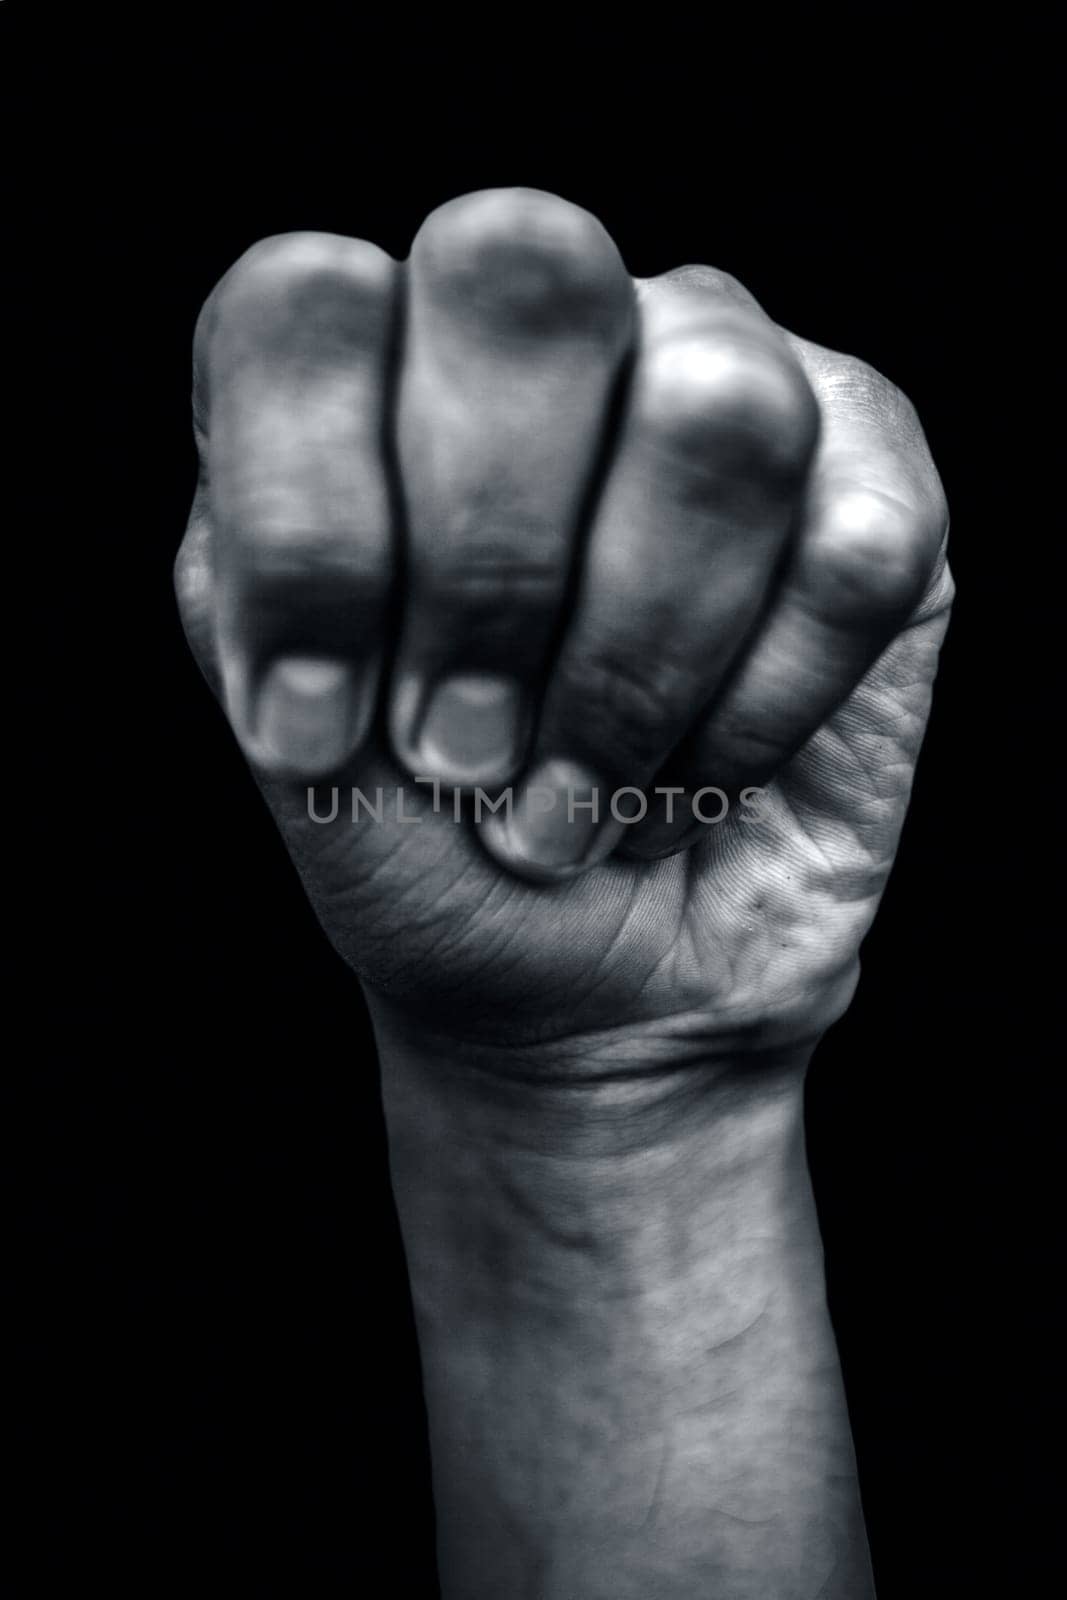 Mushti Yoga Mudra demonstrated by a single male hand isolated against a black background. by mirzamlk